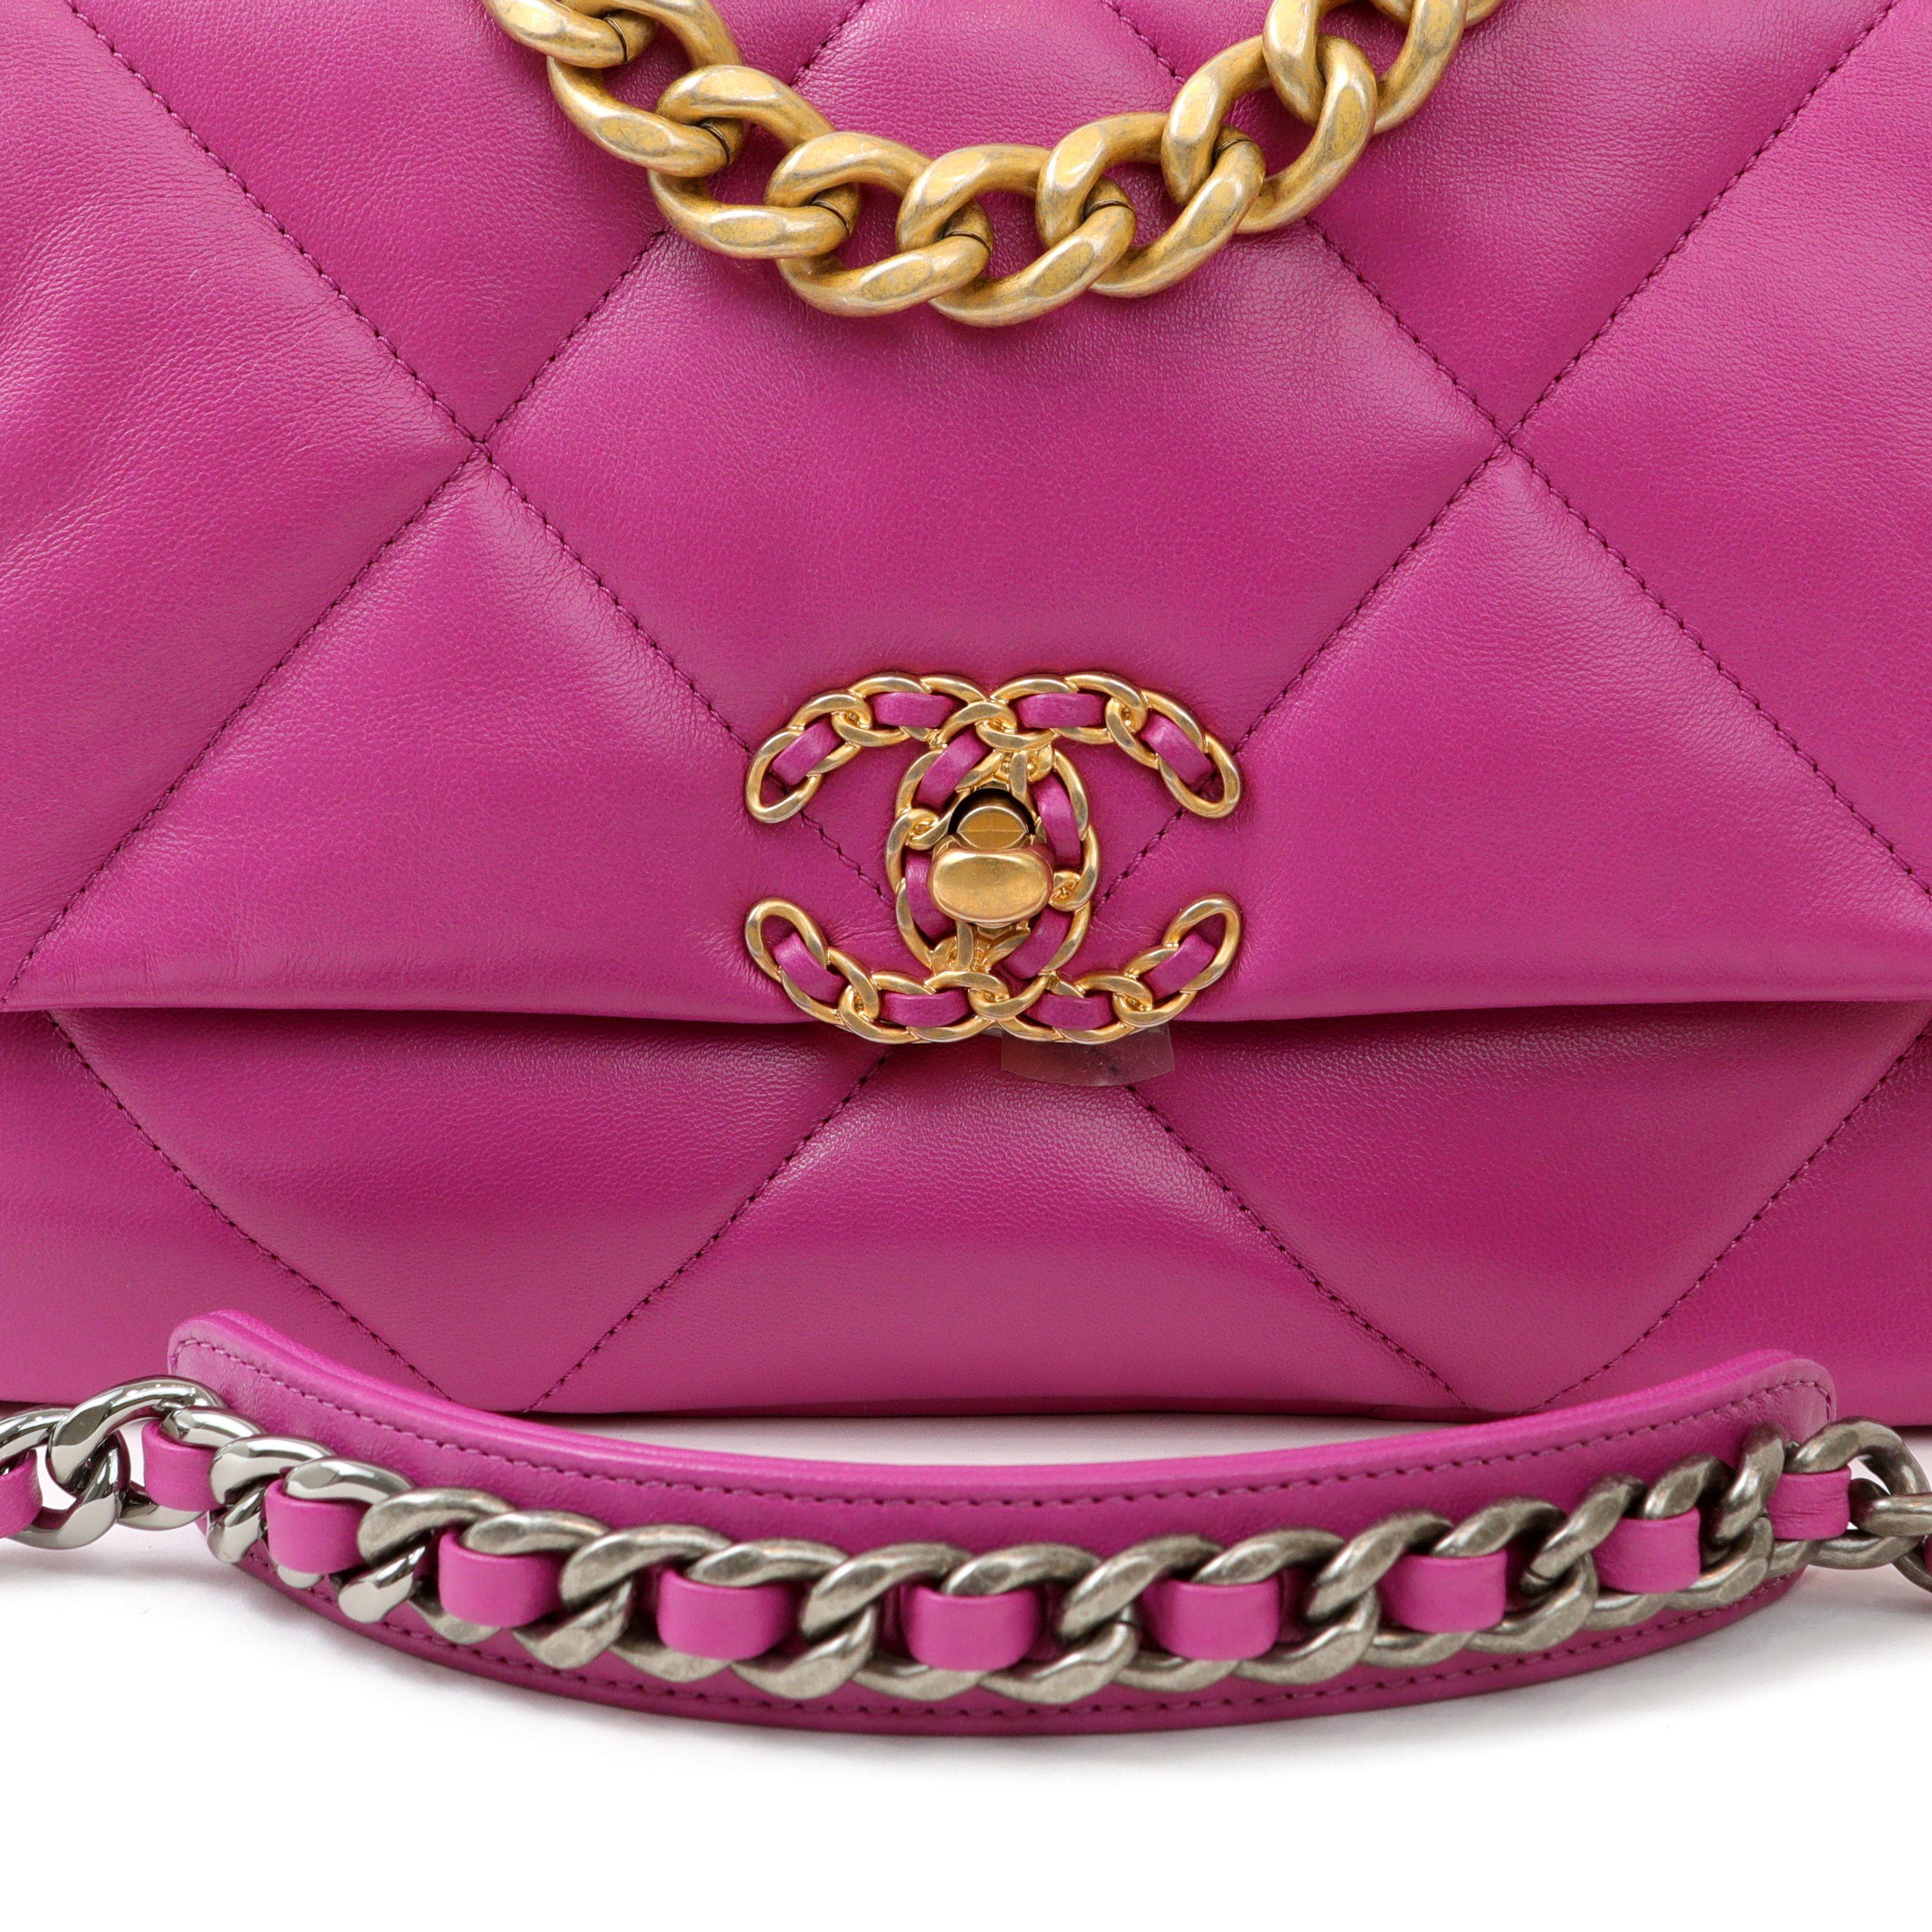 This authentic Chanel Purple Lambskin Small 19 Bag is in pristine condition.  Released in 2019, the pillowy soft oversized quilts and mixed metals are a beautiful addition to the classic flap family.  Bright purple lambskin is quilted in signature